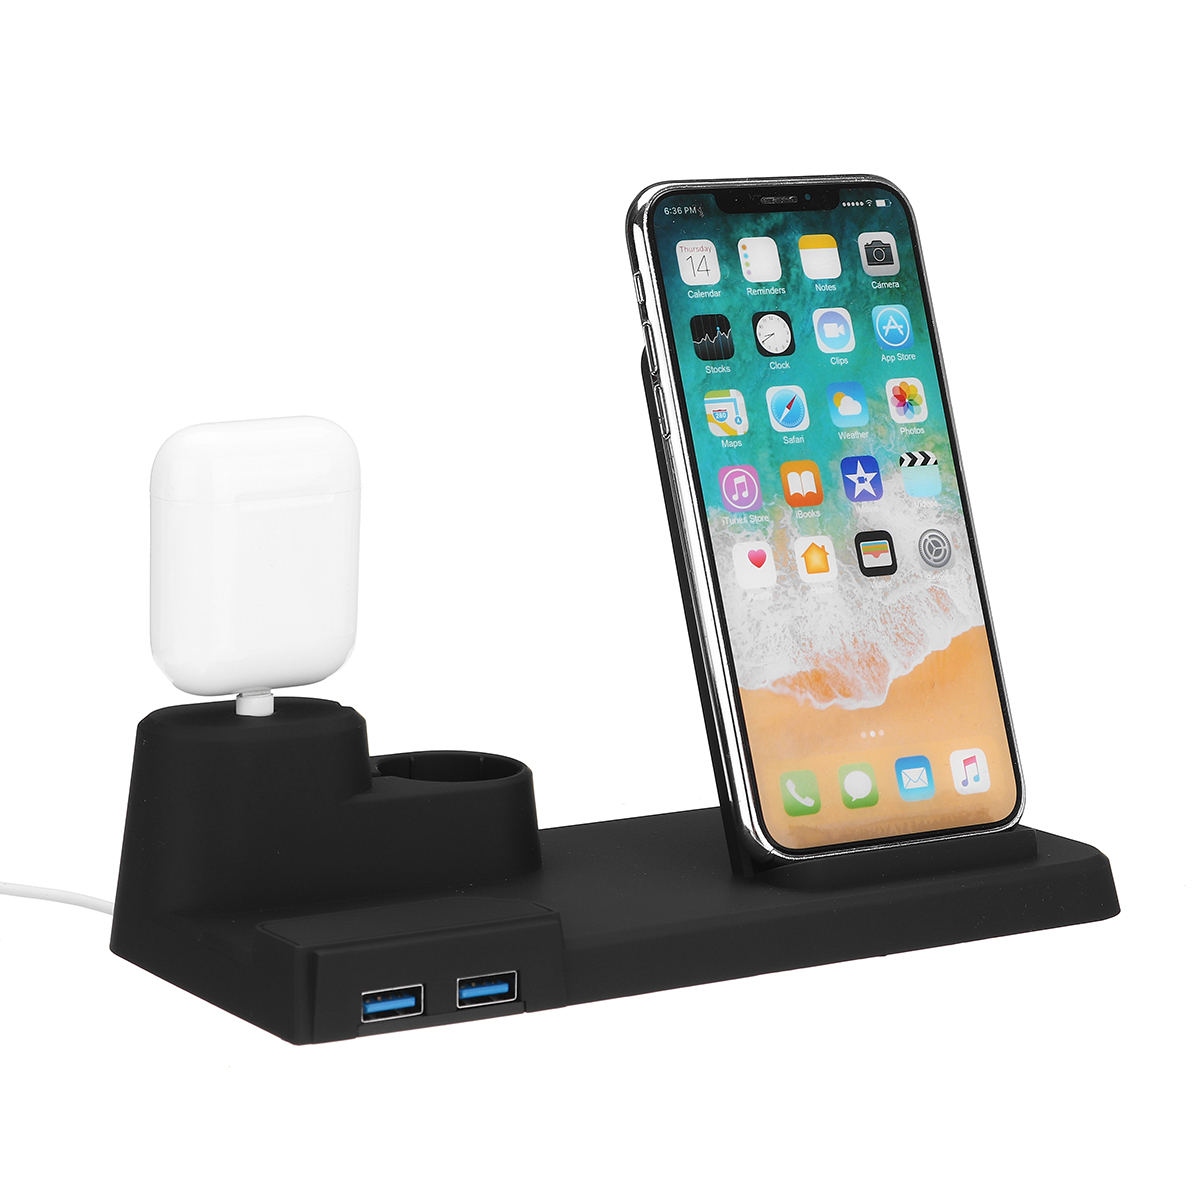 3-IN-1-Qi-Wireless-Charger-Charging-Stand-Dock-Mobile-Phone-Holder-Stand-for-iPhone-Airpods-iWatch-1790259-8